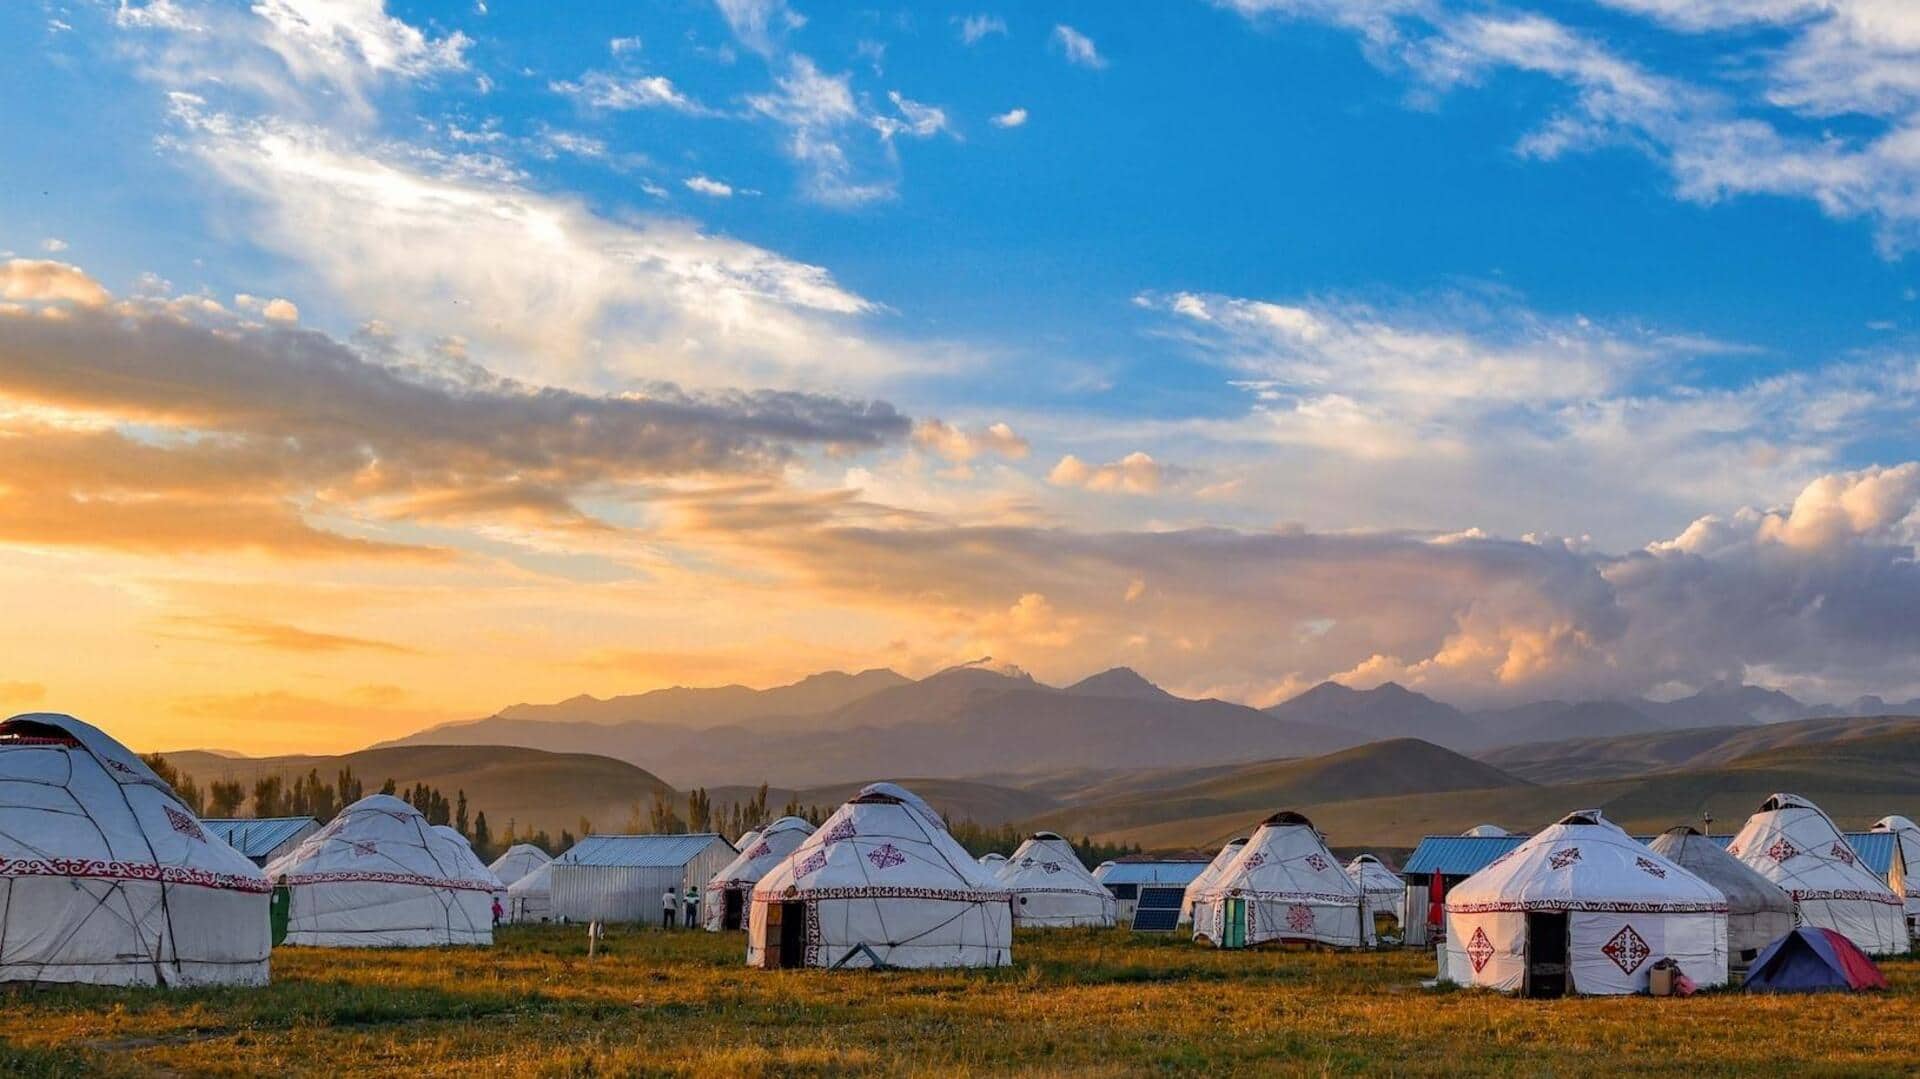 Things to do for solo adventure in the Mongolian steppe